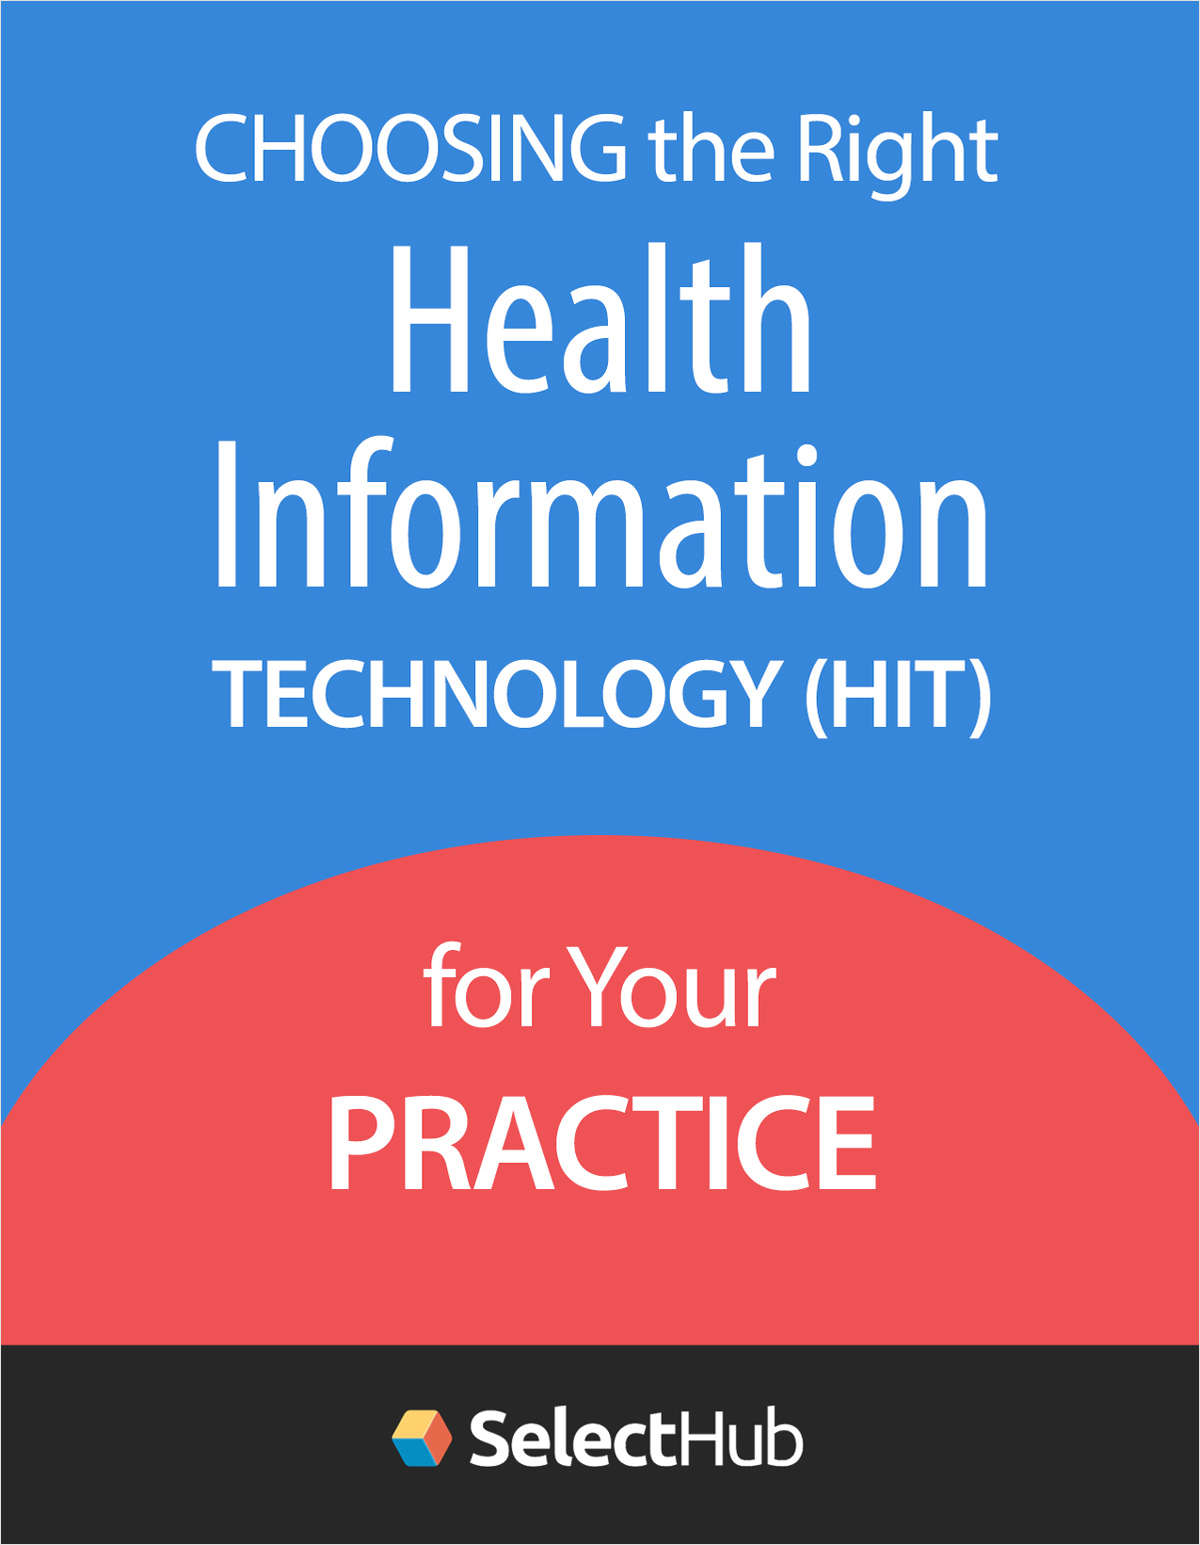 Choosing the Right Health Information Technology (HIT) for Your Practice